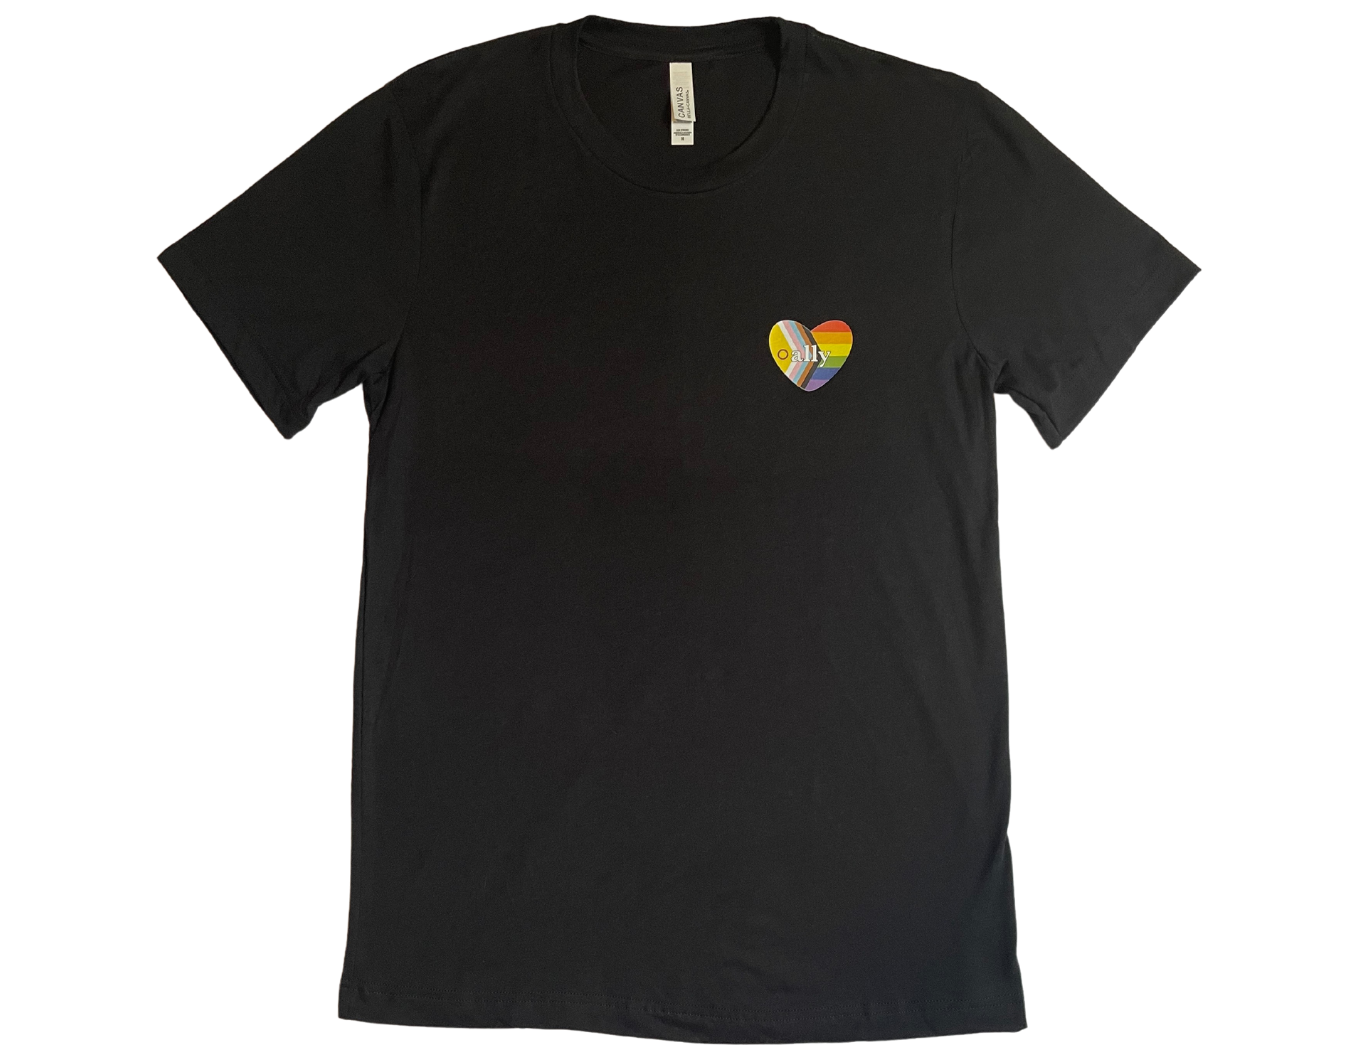 Black t-shirt is laid flat against a white background. A heart shape rainbow flag is placed over the left chest with the word ally centered amongst it.